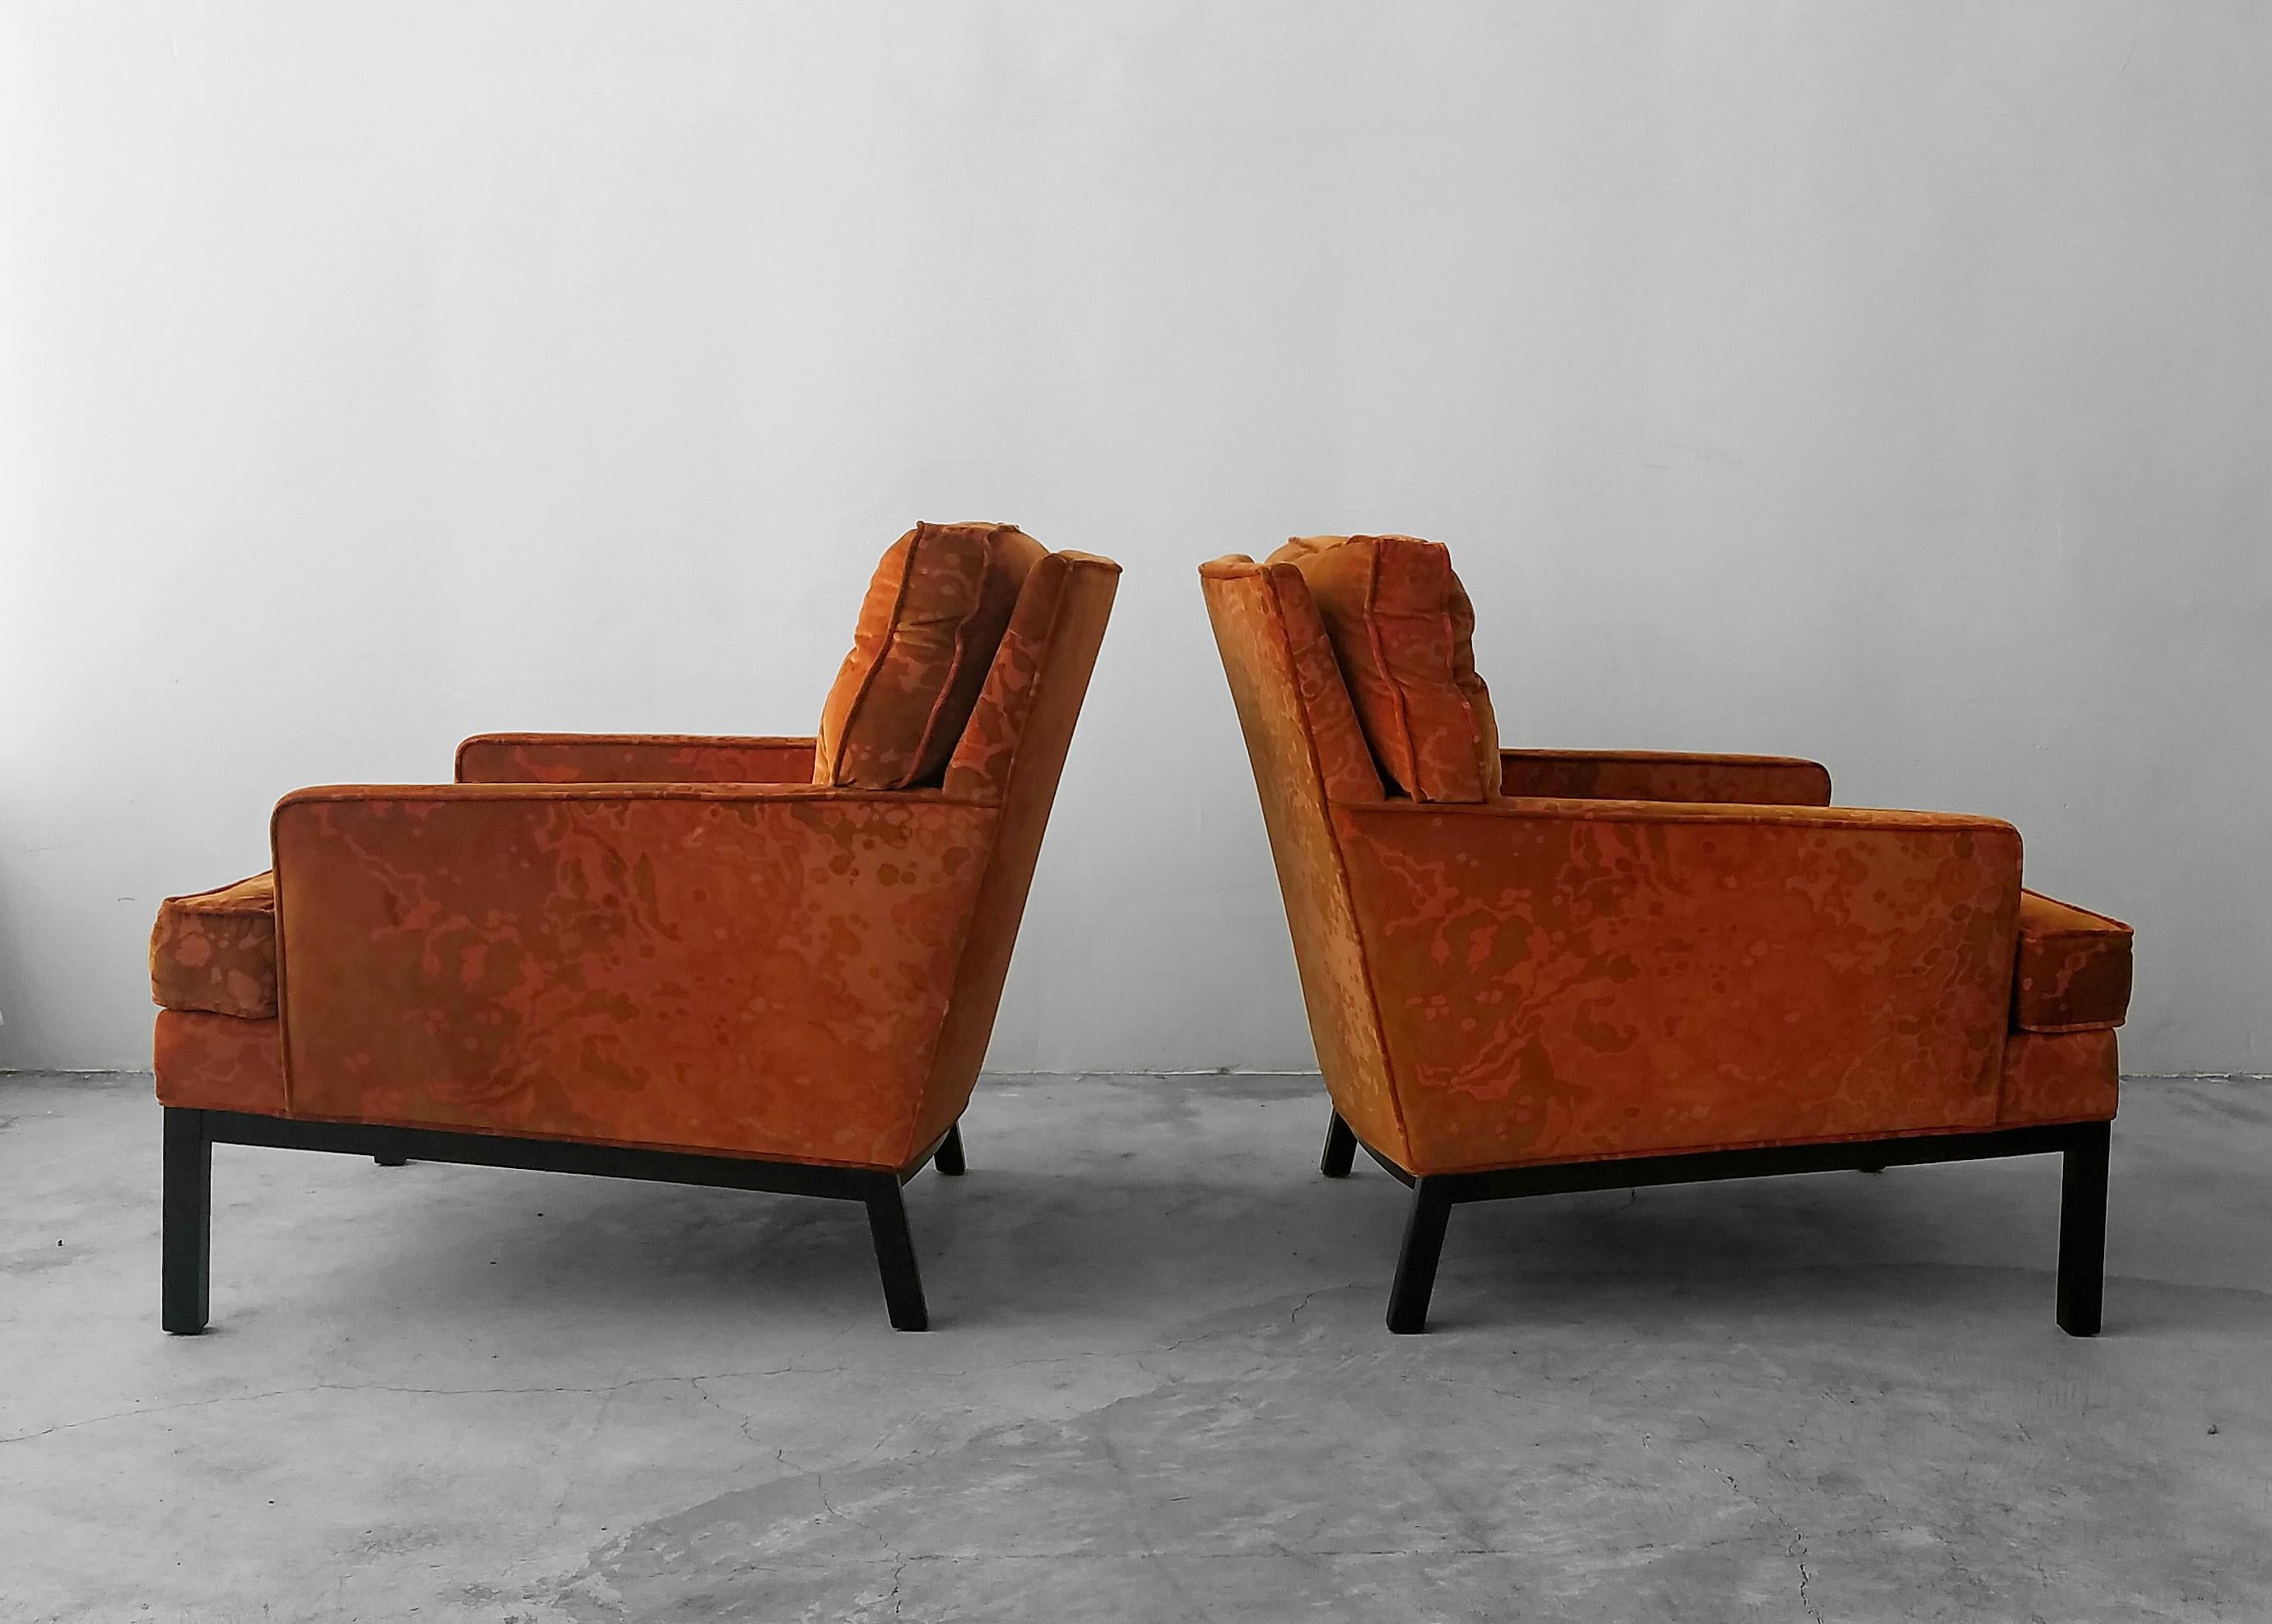 20th Century Pair of Midcentury Lounge Chairs by Harvey Probber in Jack Lenor Larsen Fabric